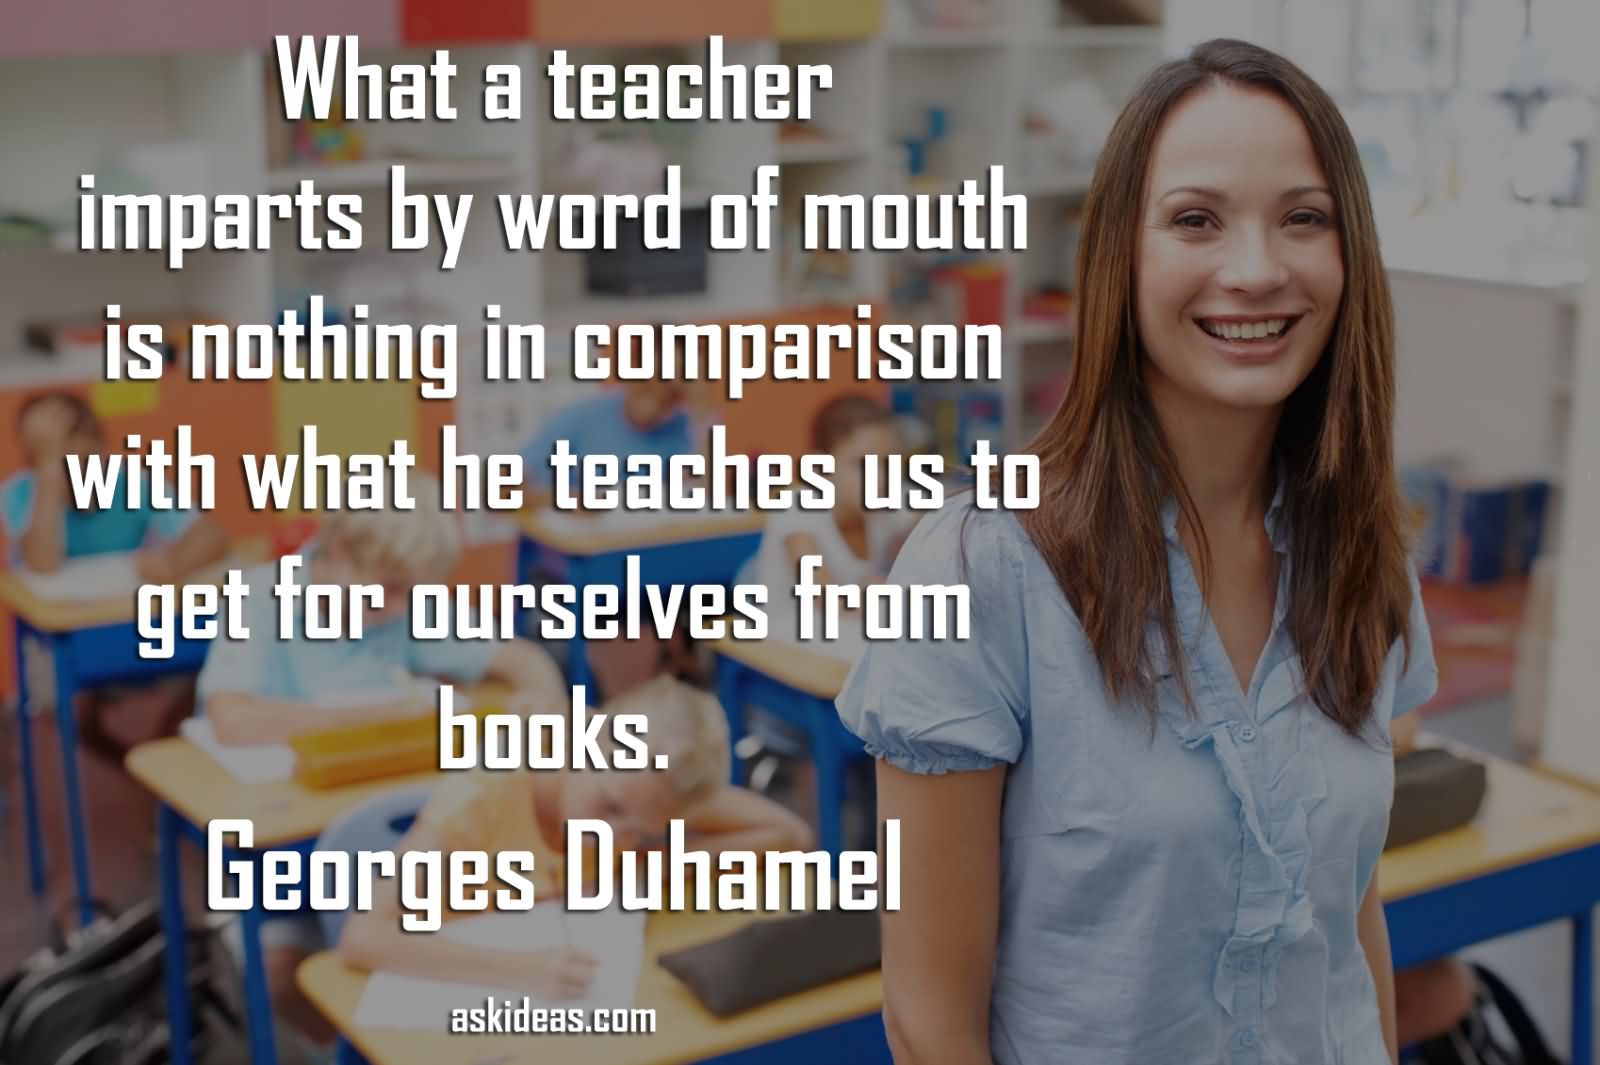 What a teacher imparts by word of mouth is nothing in comparison with what he teaches us to get for ourselves from books.